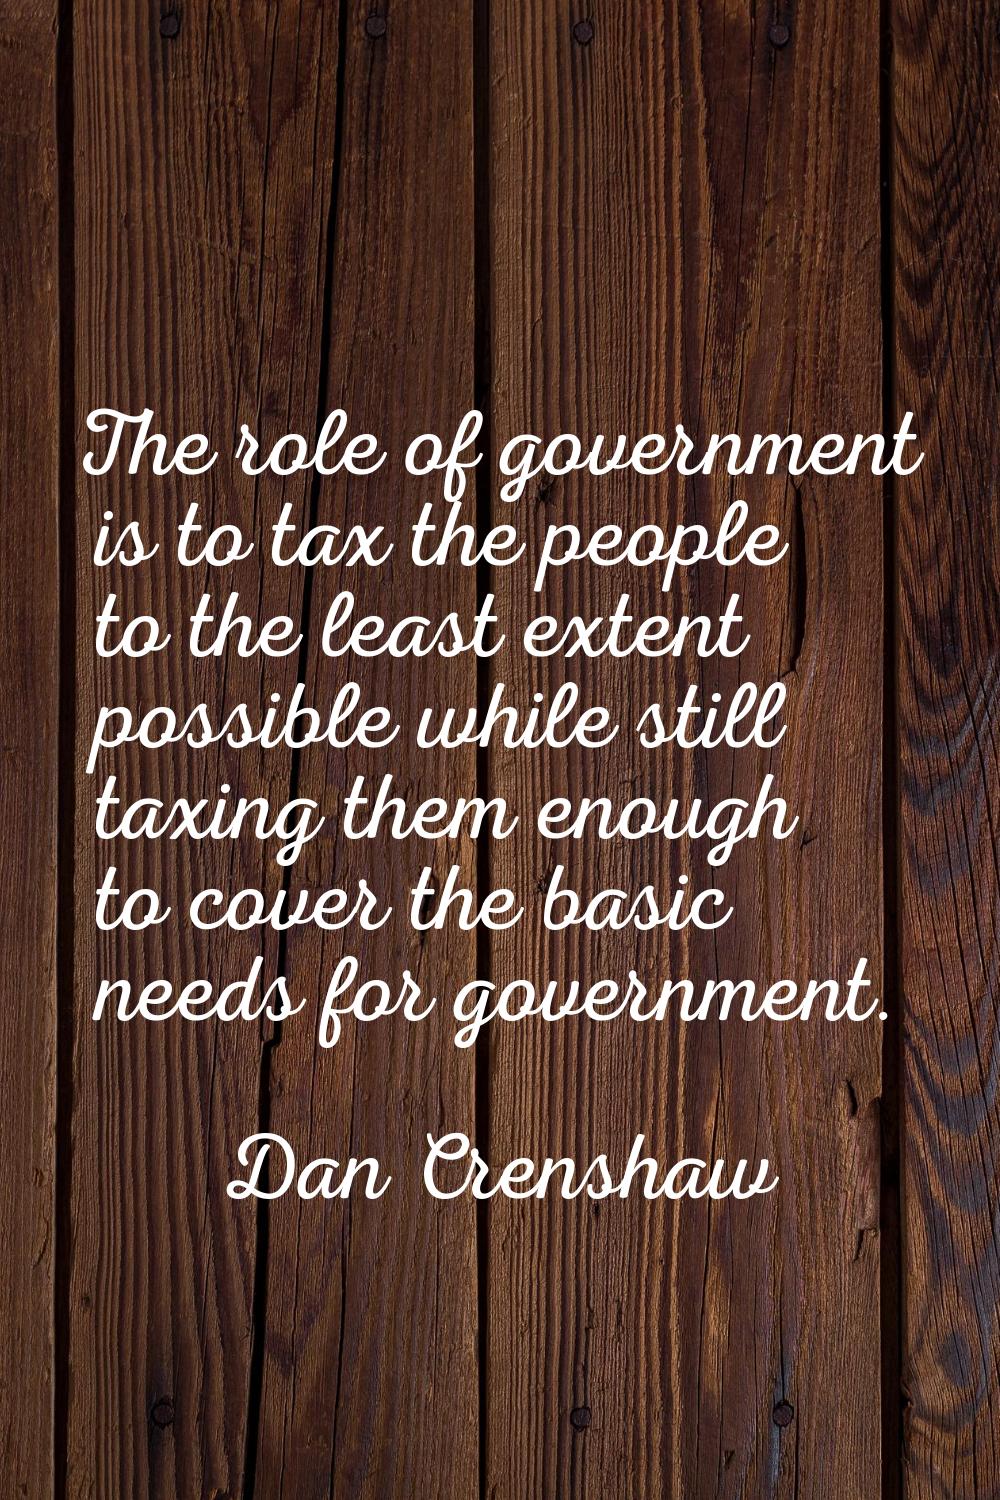 The role of government is to tax the people to the least extent possible while still taxing them en